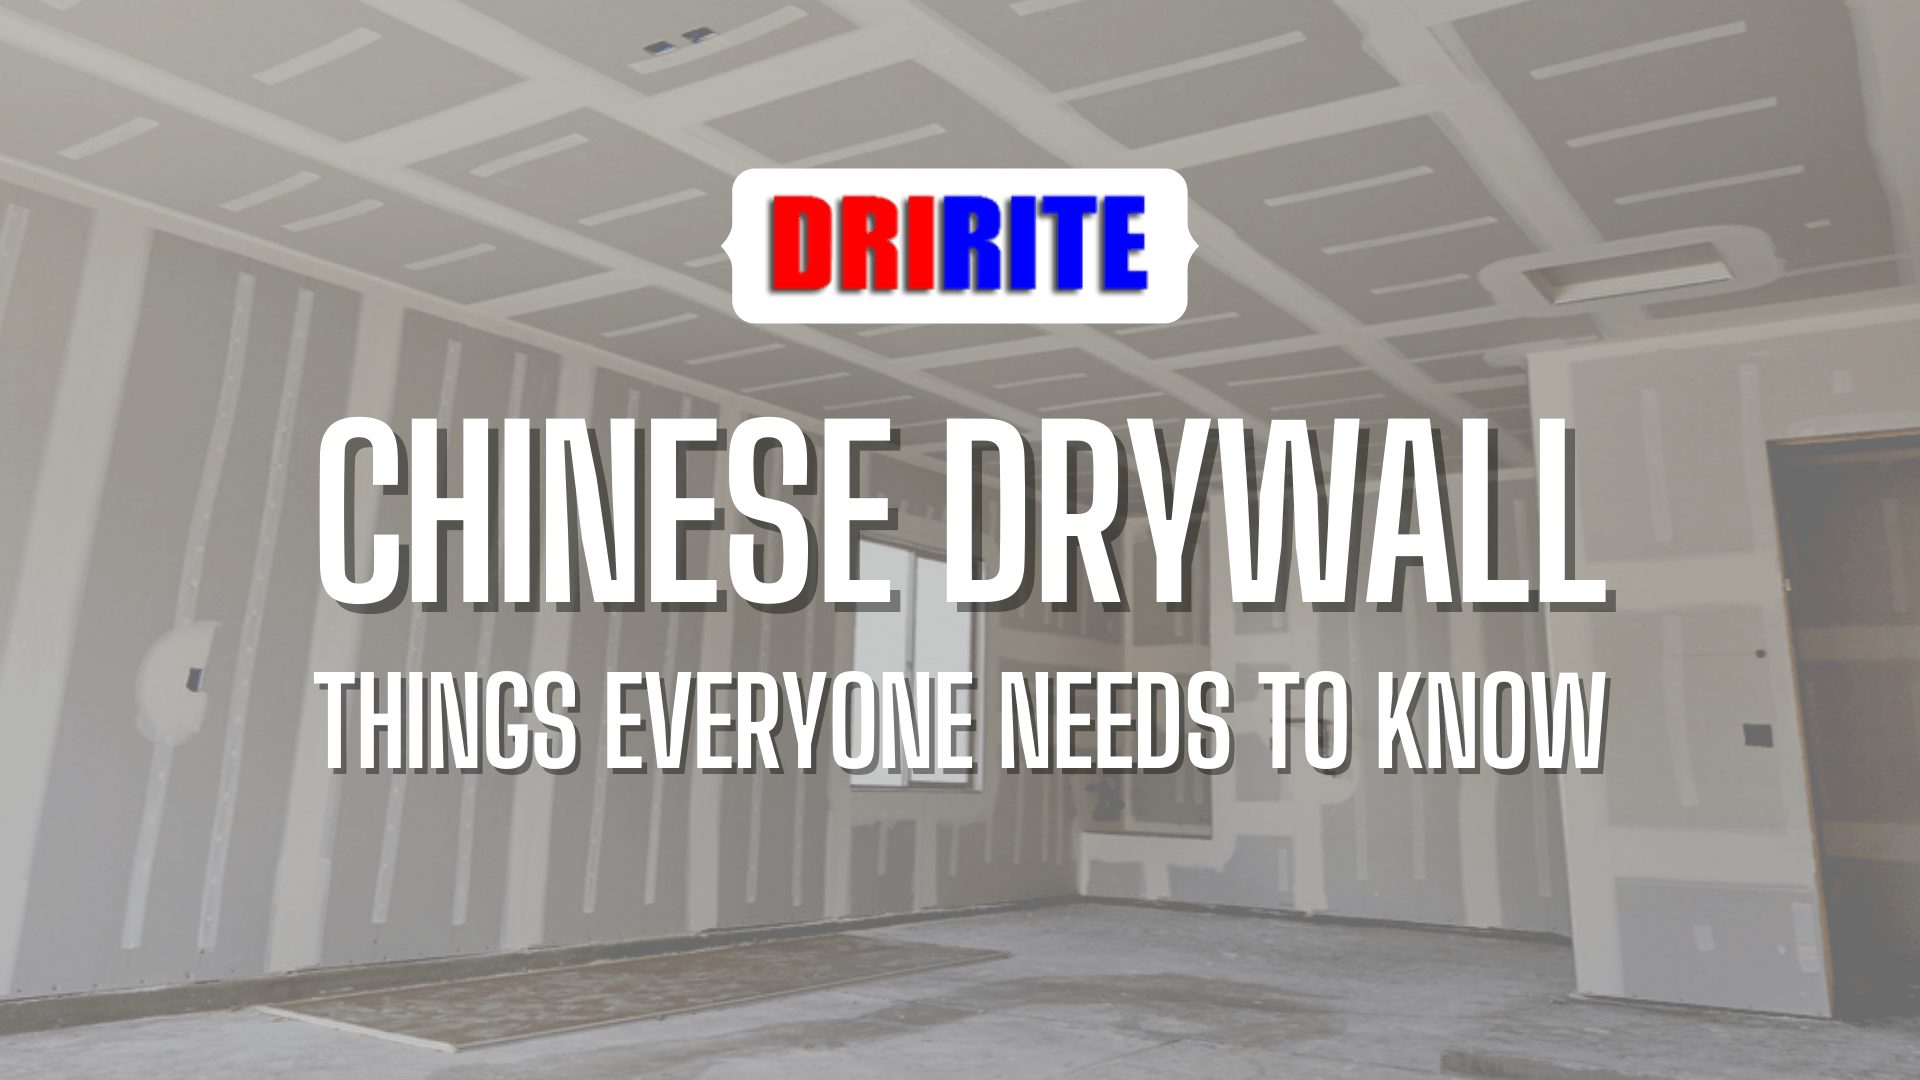 Chinese Drywall Things Everyone Needs to Know